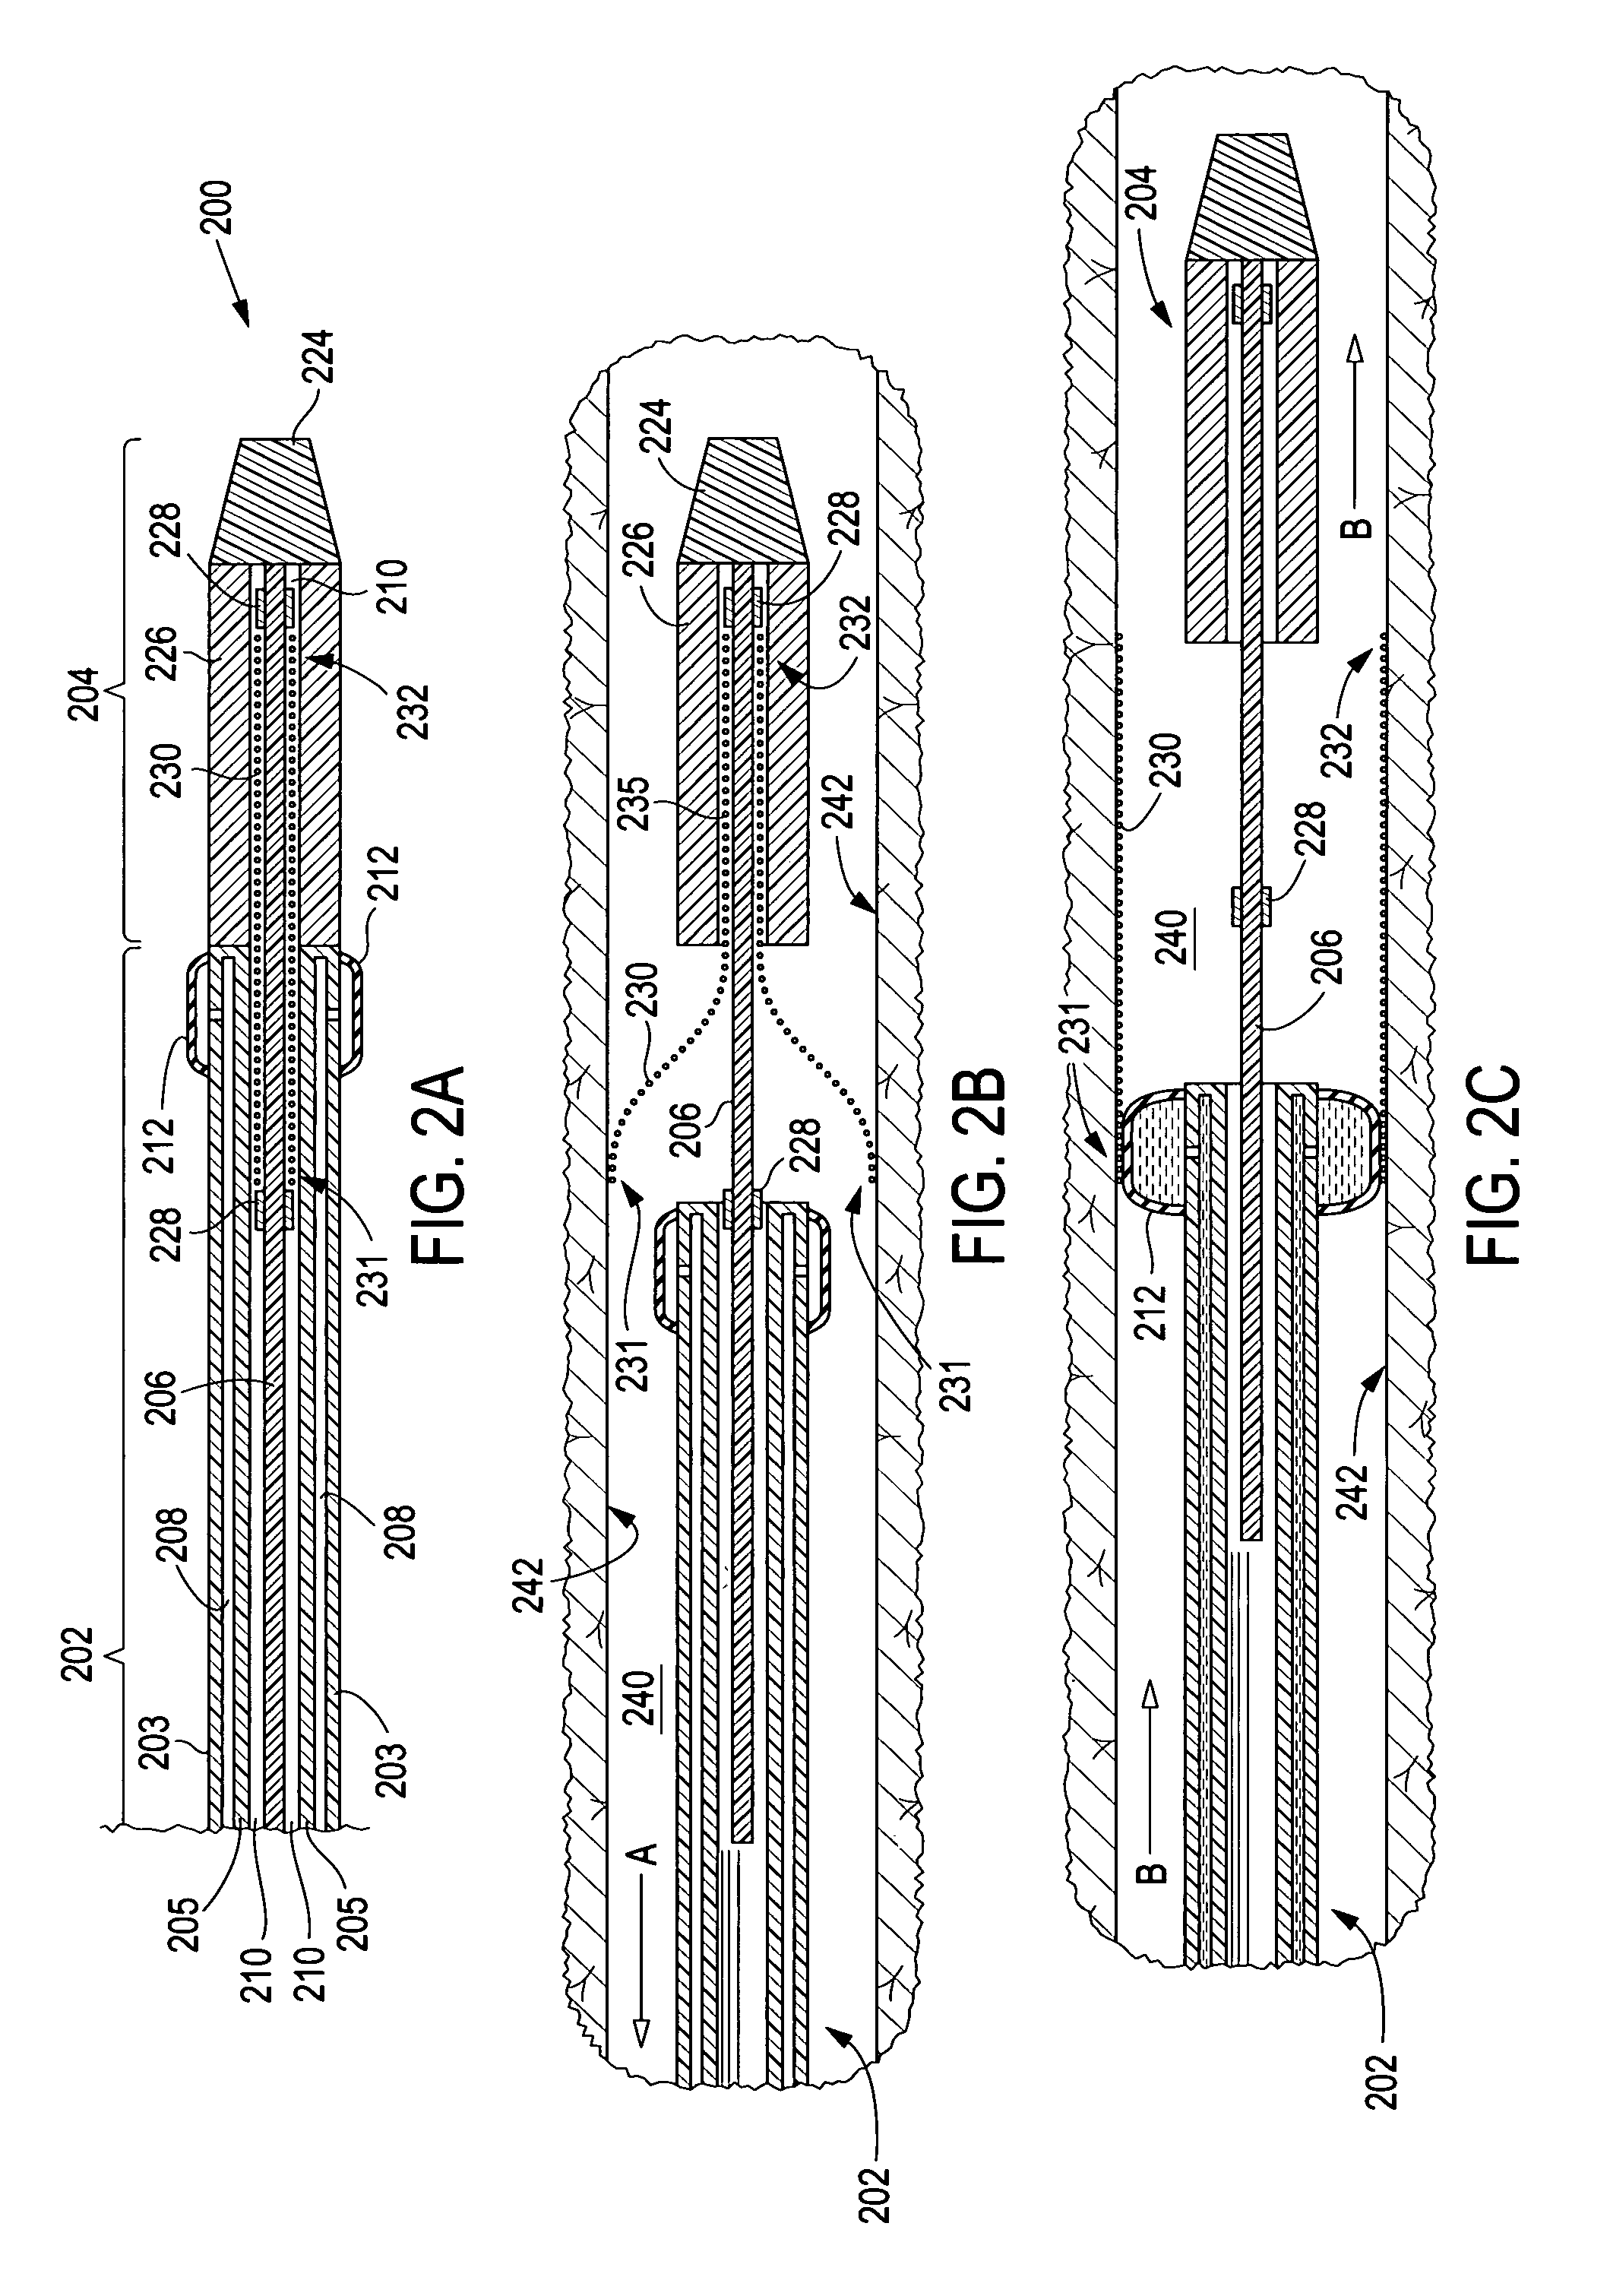 Apparatus and method for deployment of an endoluminal device